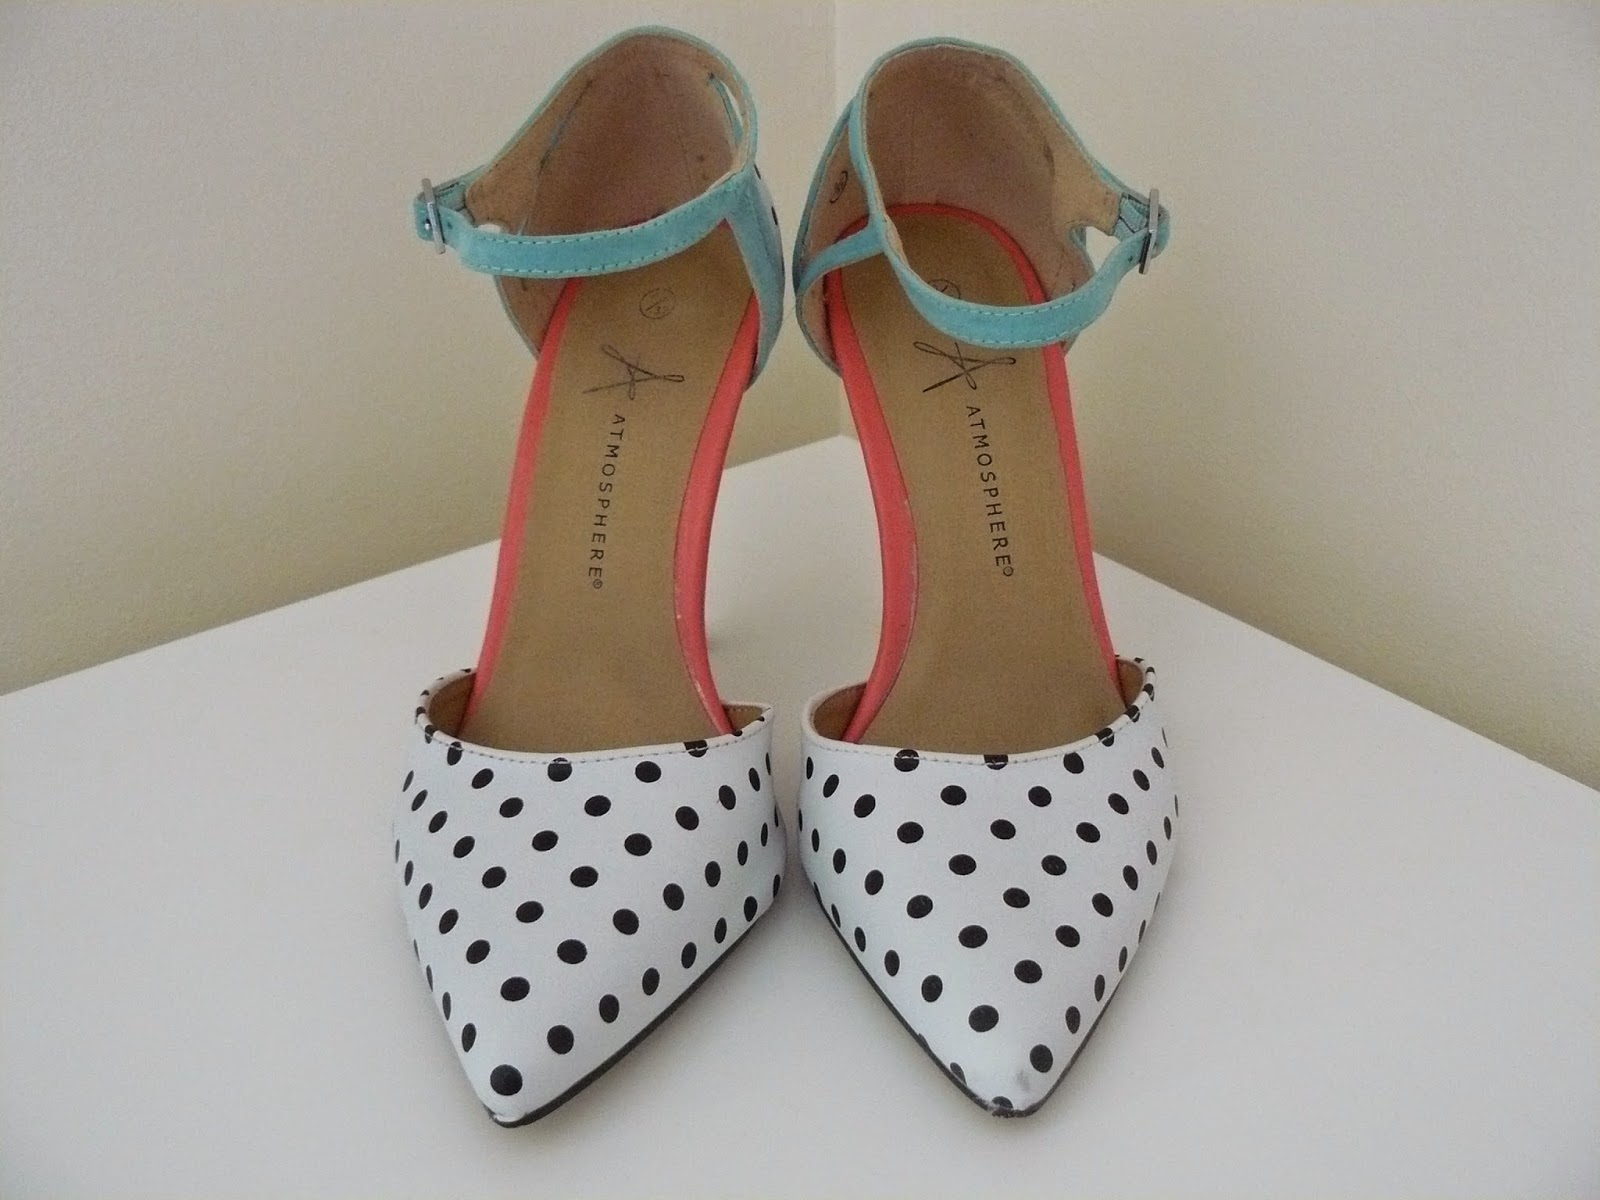 Lucy Abigail: New Shoes: Primark Polka Dot Heels